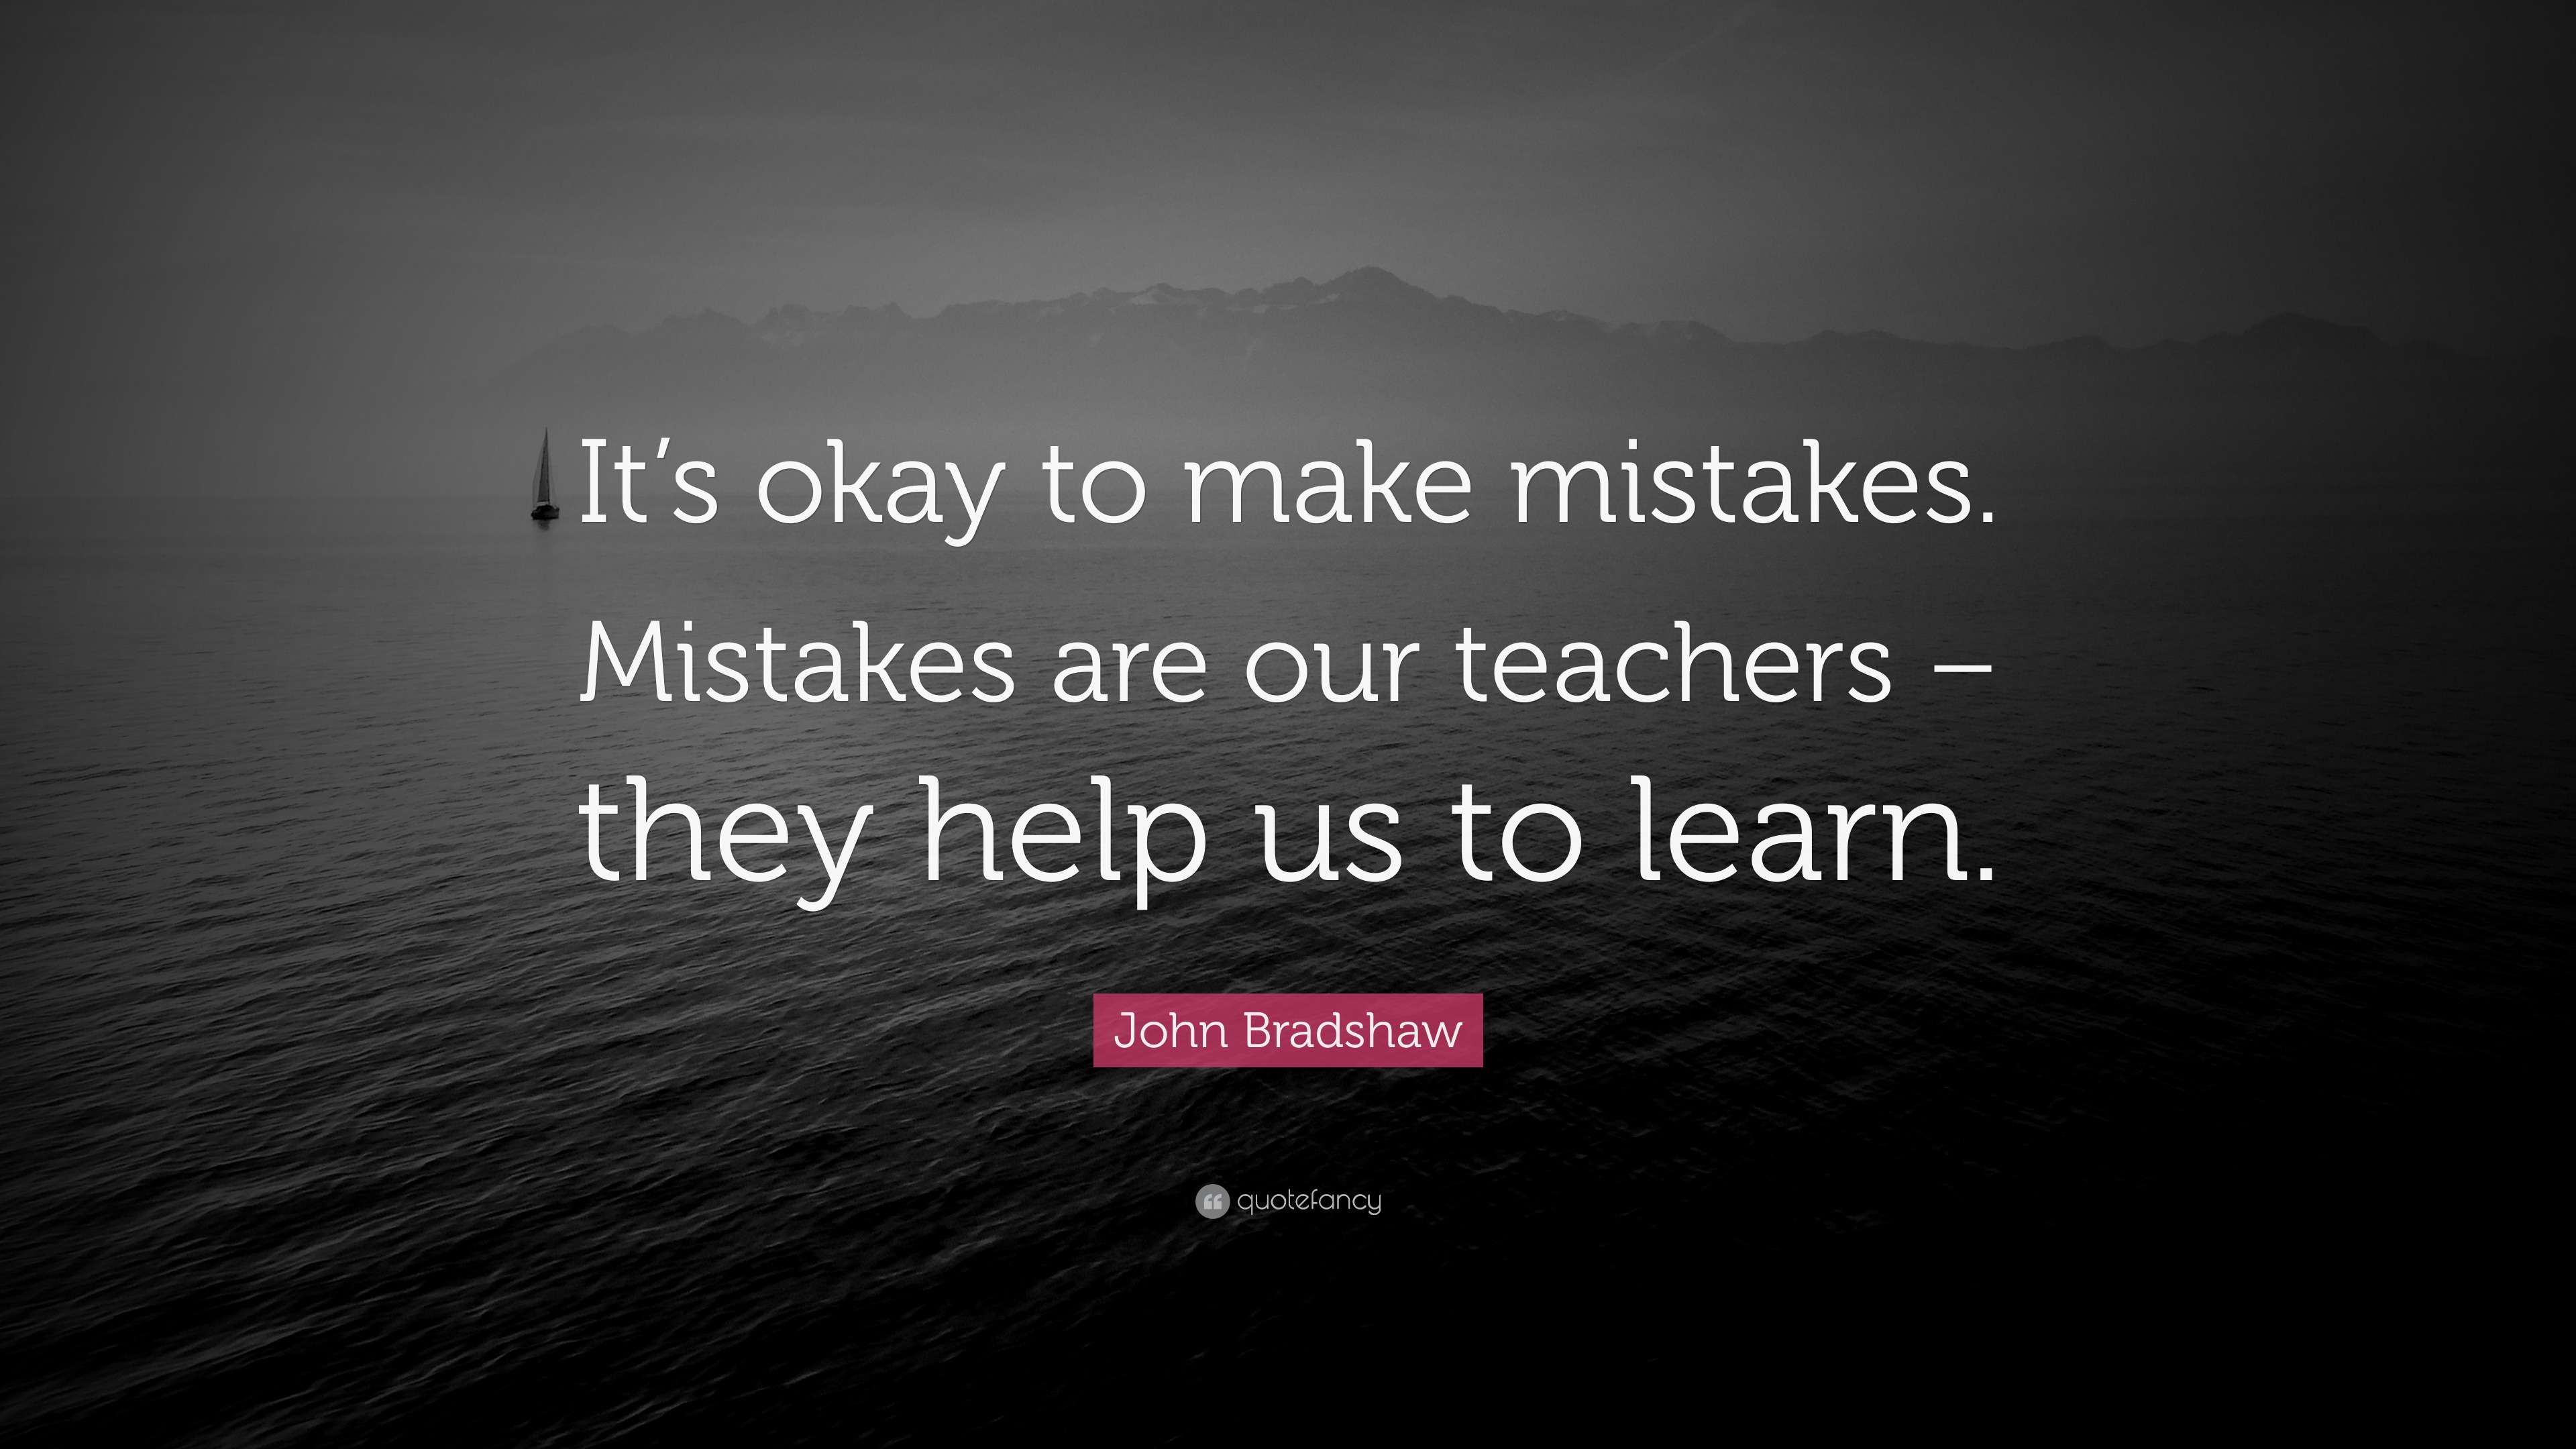 John Bradshaw Quote: “It’s okay to make mistakes. Mistakes are our